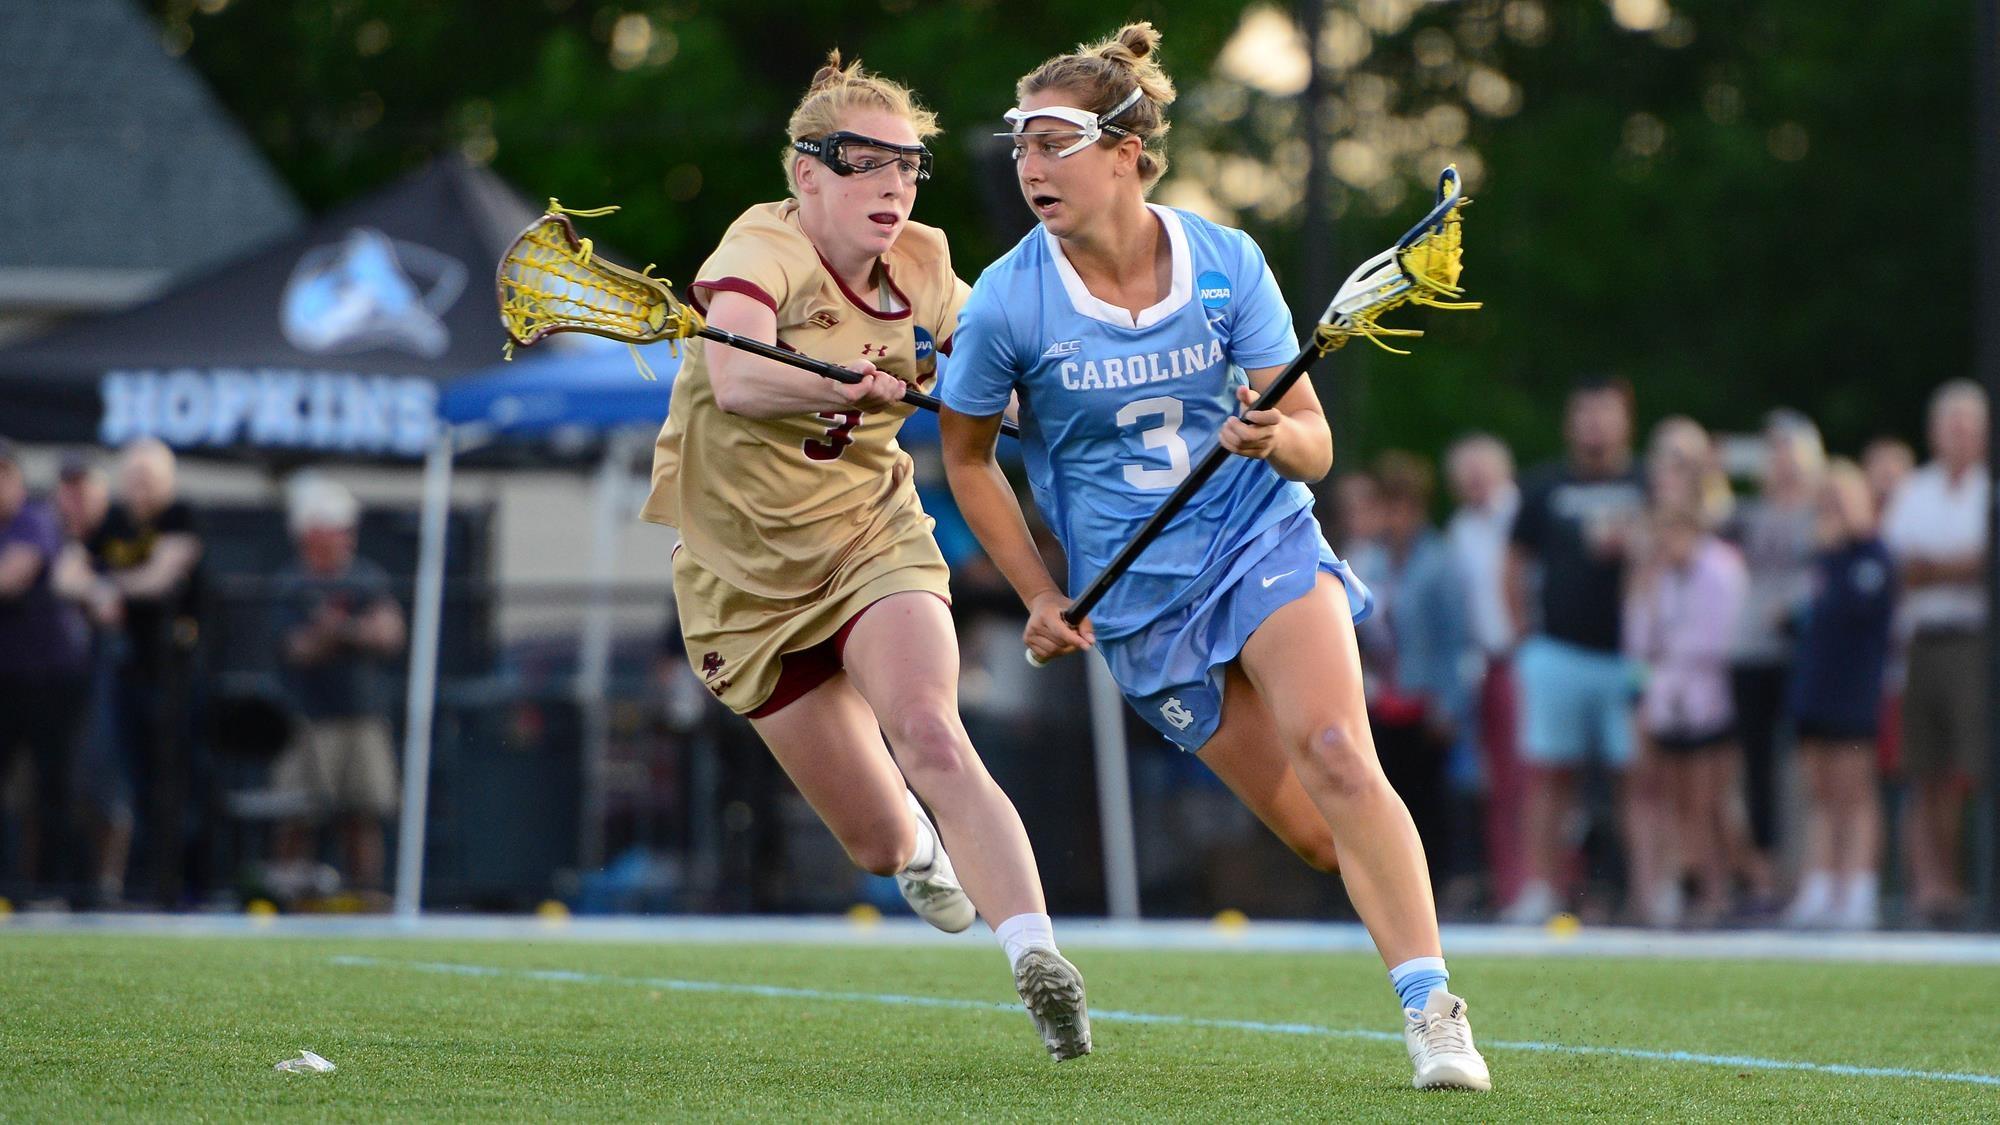 Top offensive impact players returning for the 2020 women's lacrosse season